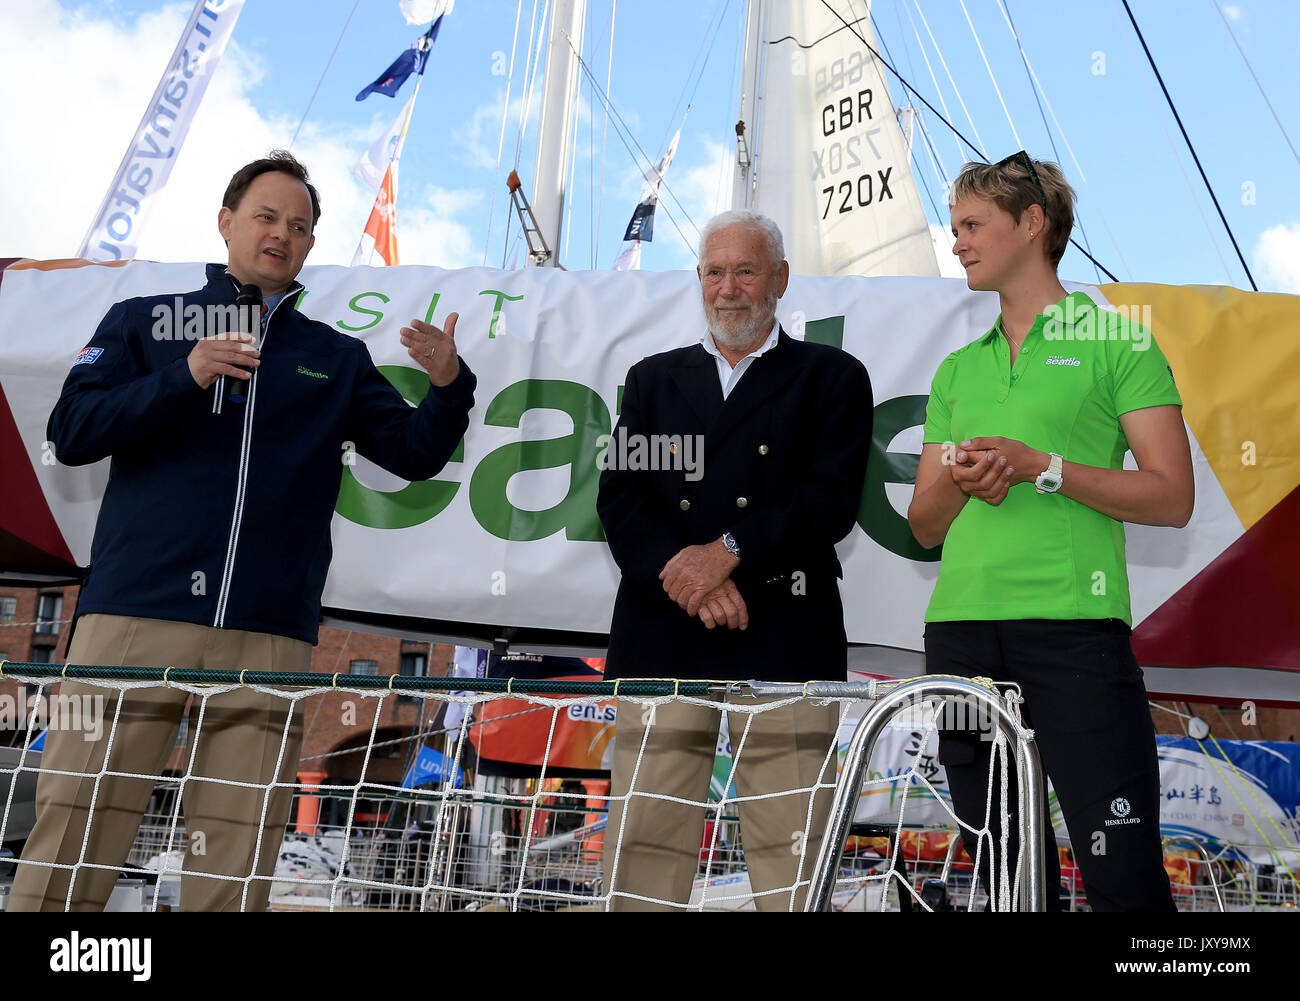 (left to right) Ralph Morton Executive Director at Seattle Sports Commission, Sir Robin Knox-Johnston and Nikki Henderson skipper of Visit Seattle at Albert Docks, Liverpool ahead of this Sunday's start of the Clipper Round the World yacht race. PRESS ASSOCIATION Photo. Picture date: Thursday August 17, 2017. Photo credit should read: Clint Hughes/PA Wire Stock Photo